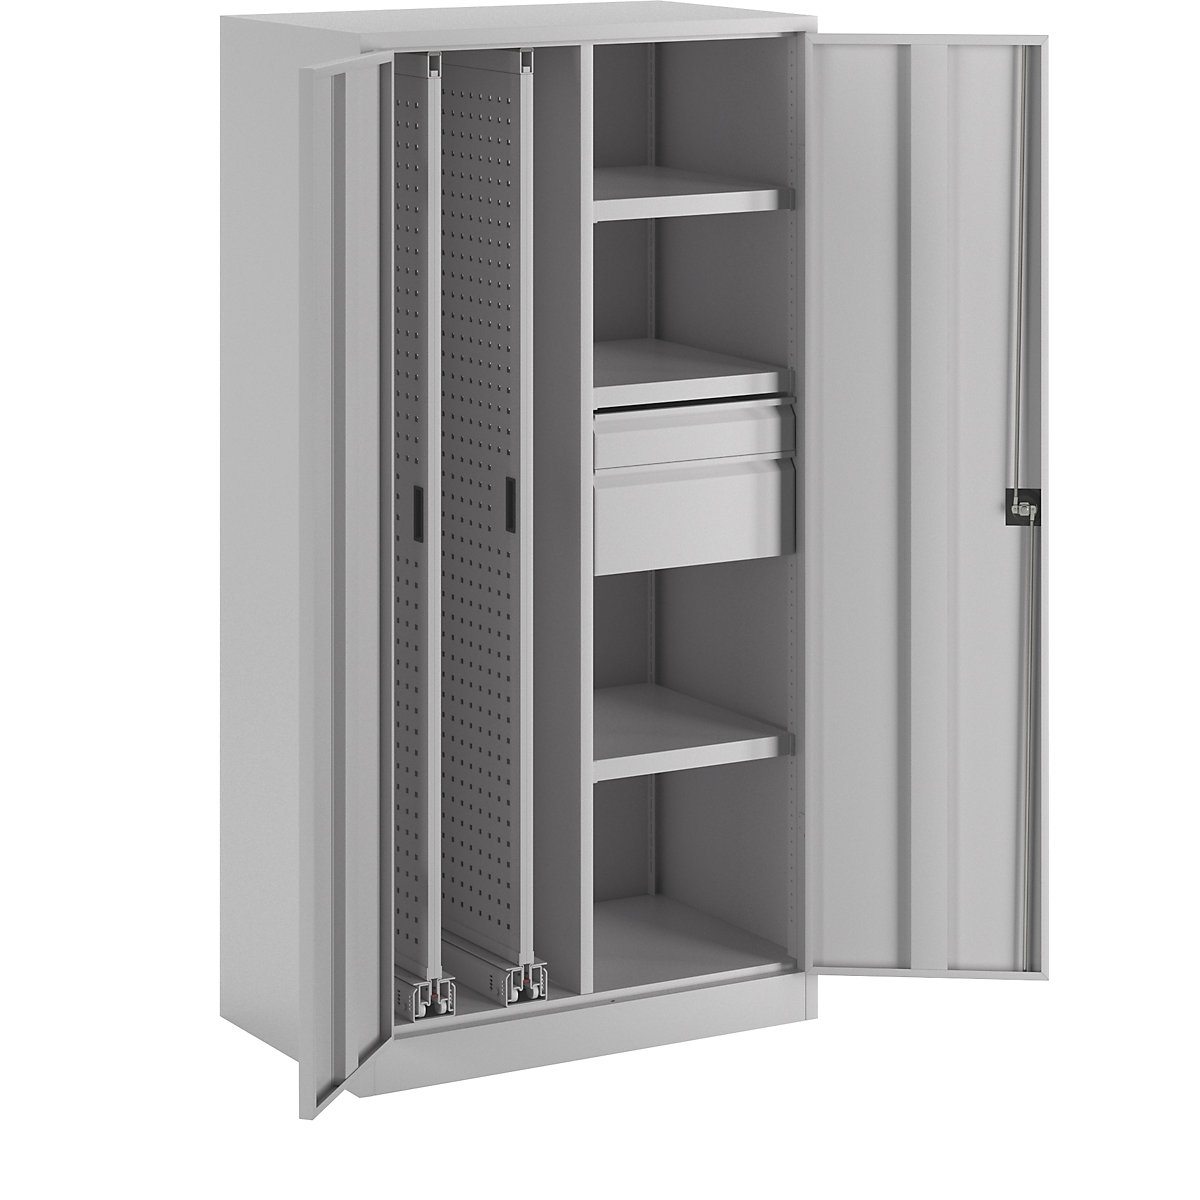 Vertical pull-out cupboard – Pavoy